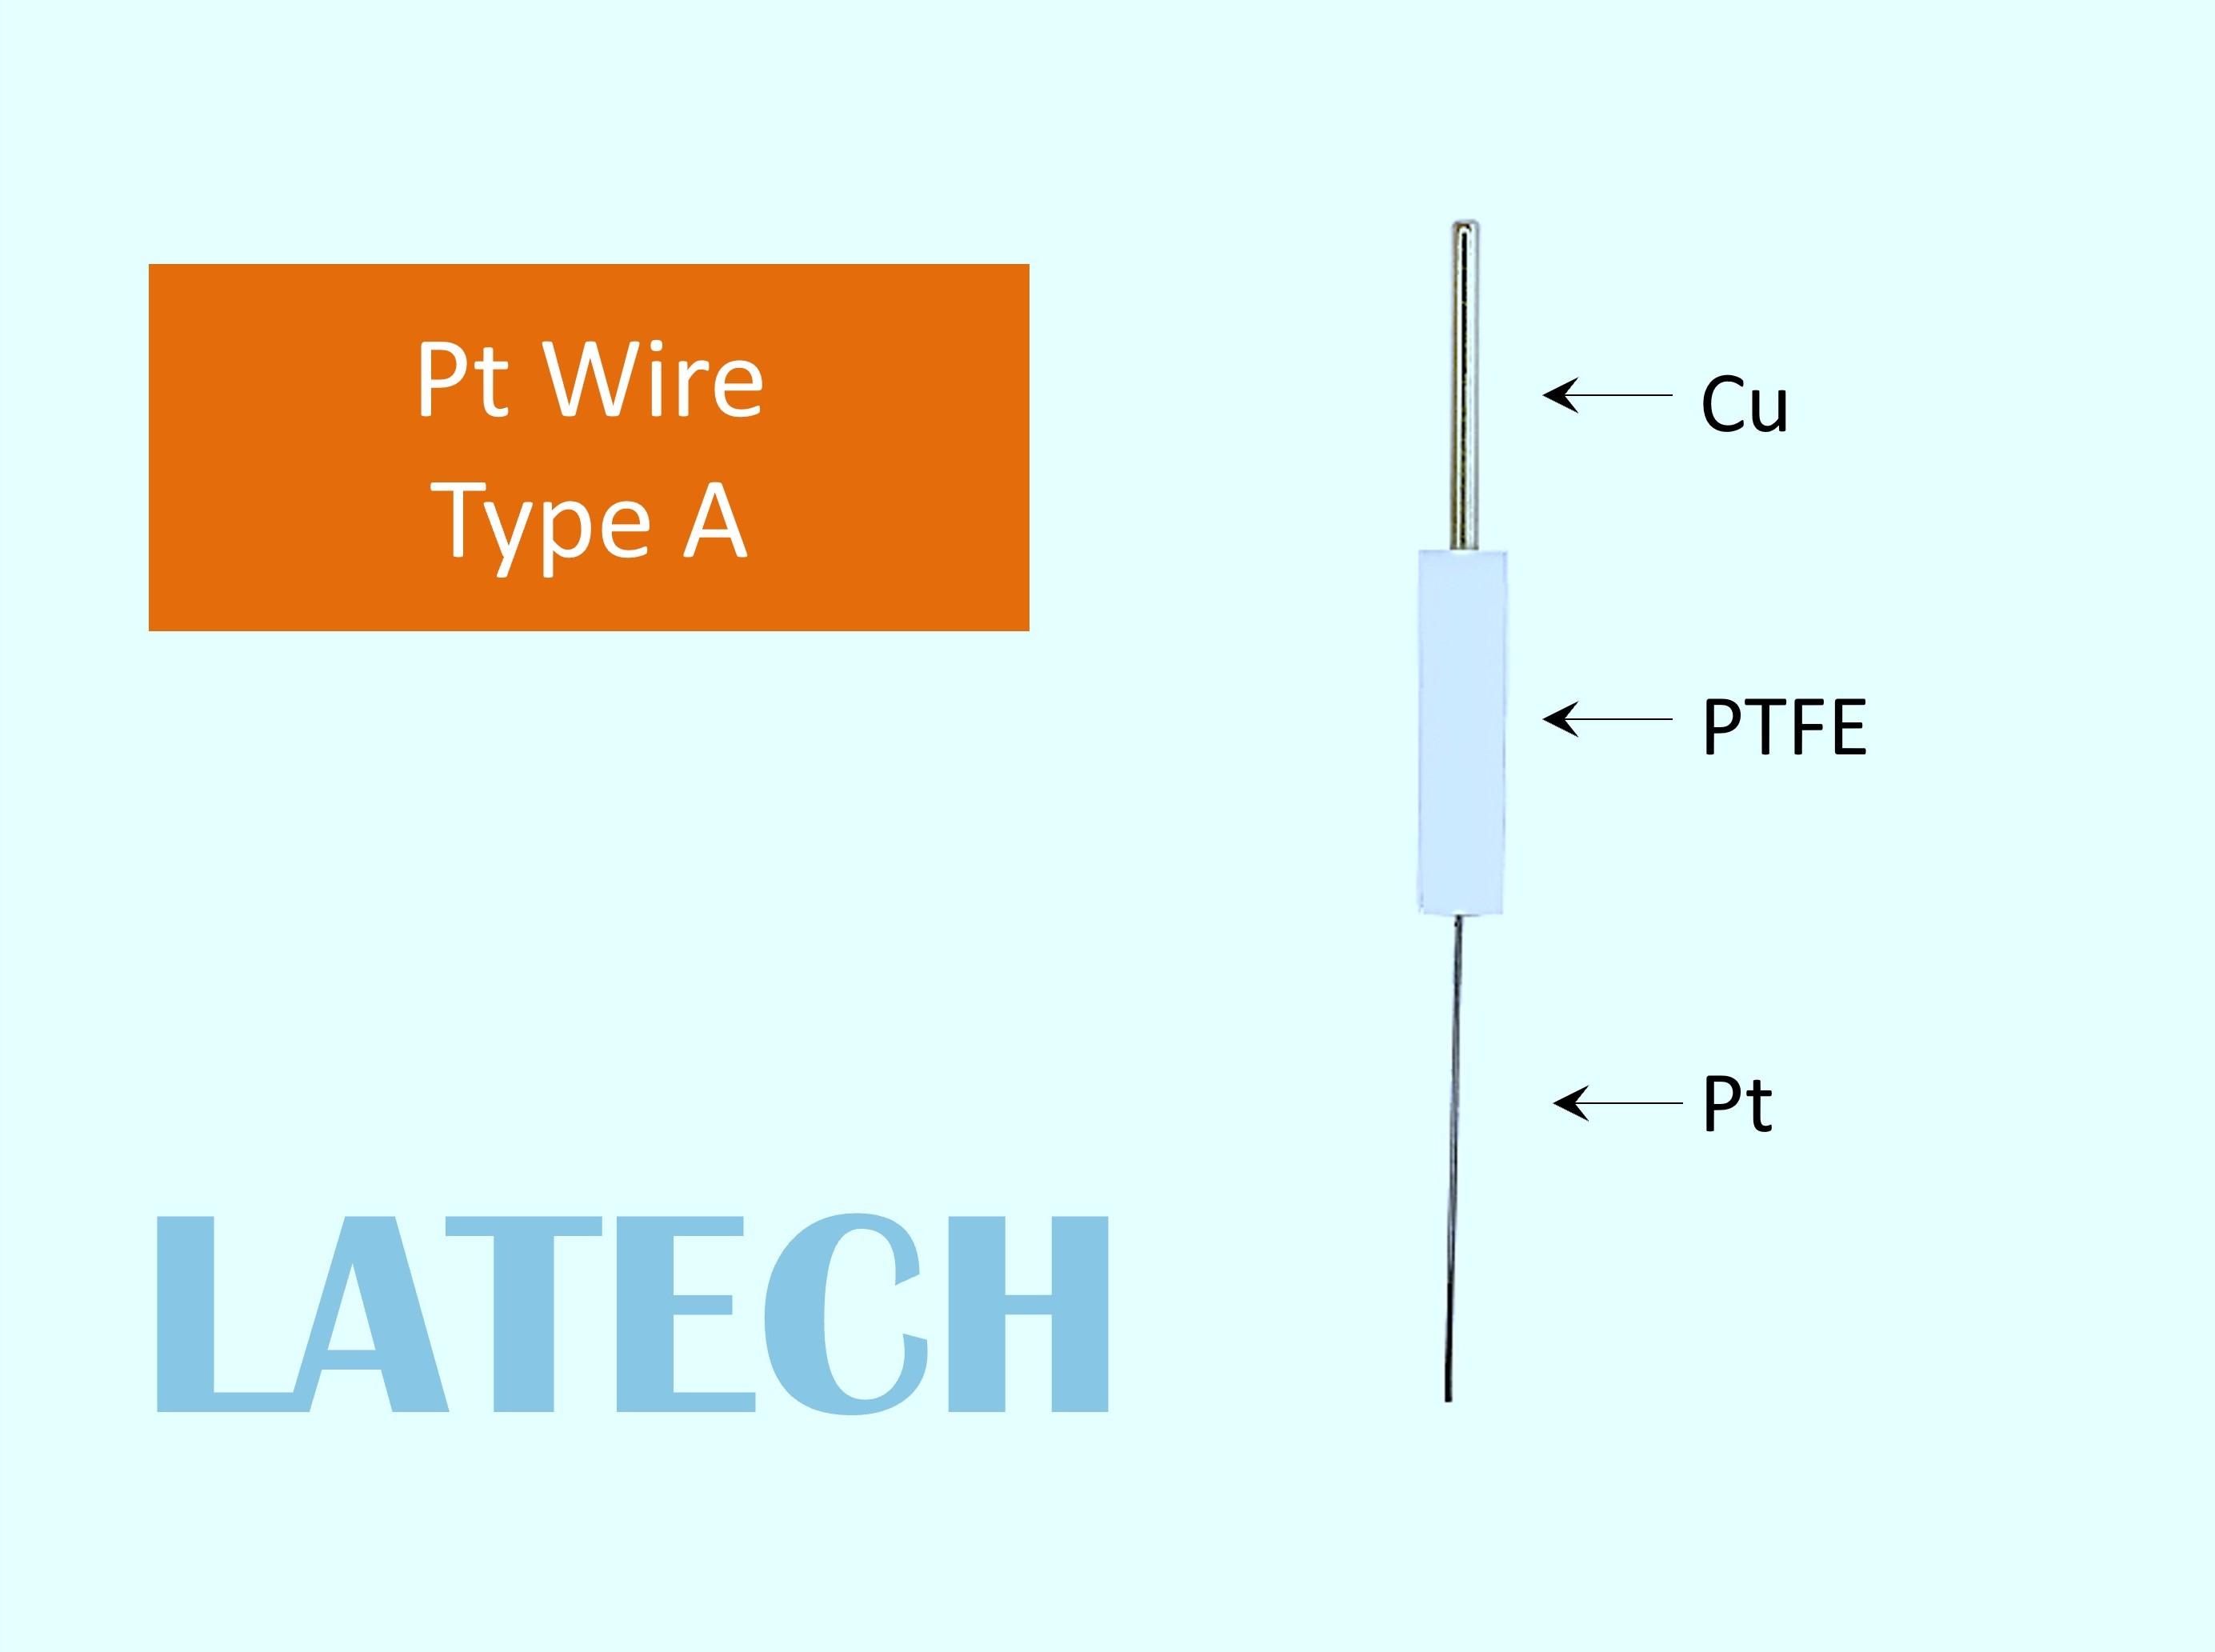 Pt wire Type A Latech.jpg